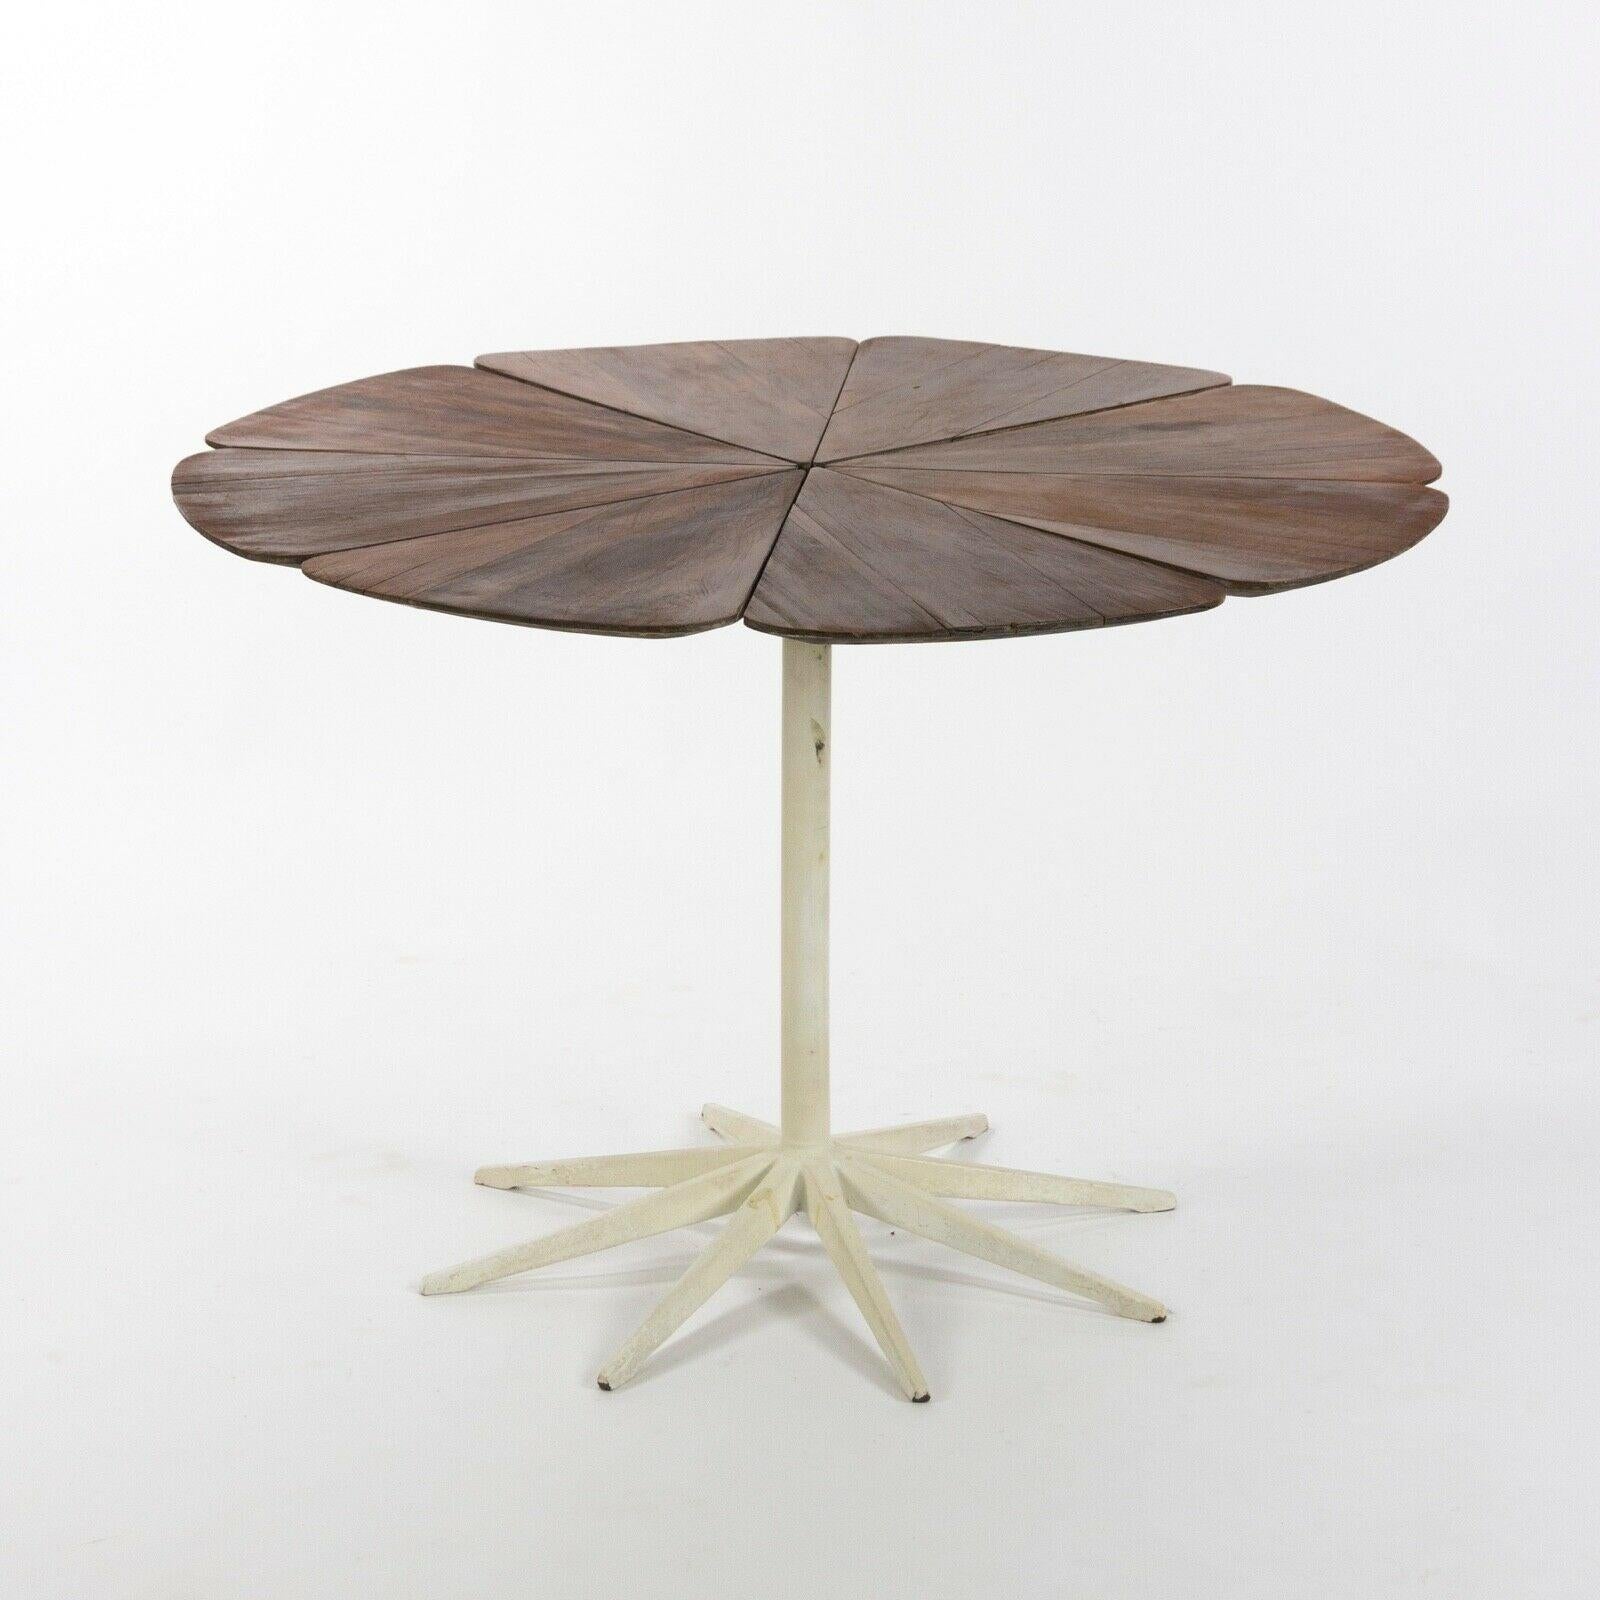 Listed for sale is an exceptionally rare vintage petal dining table, produced by Knoll and Designed by Richard Schultz.
This table has a fabulous patina to the redwood top. It is an earlier piece from the 1960's. As a result, the redwood carries